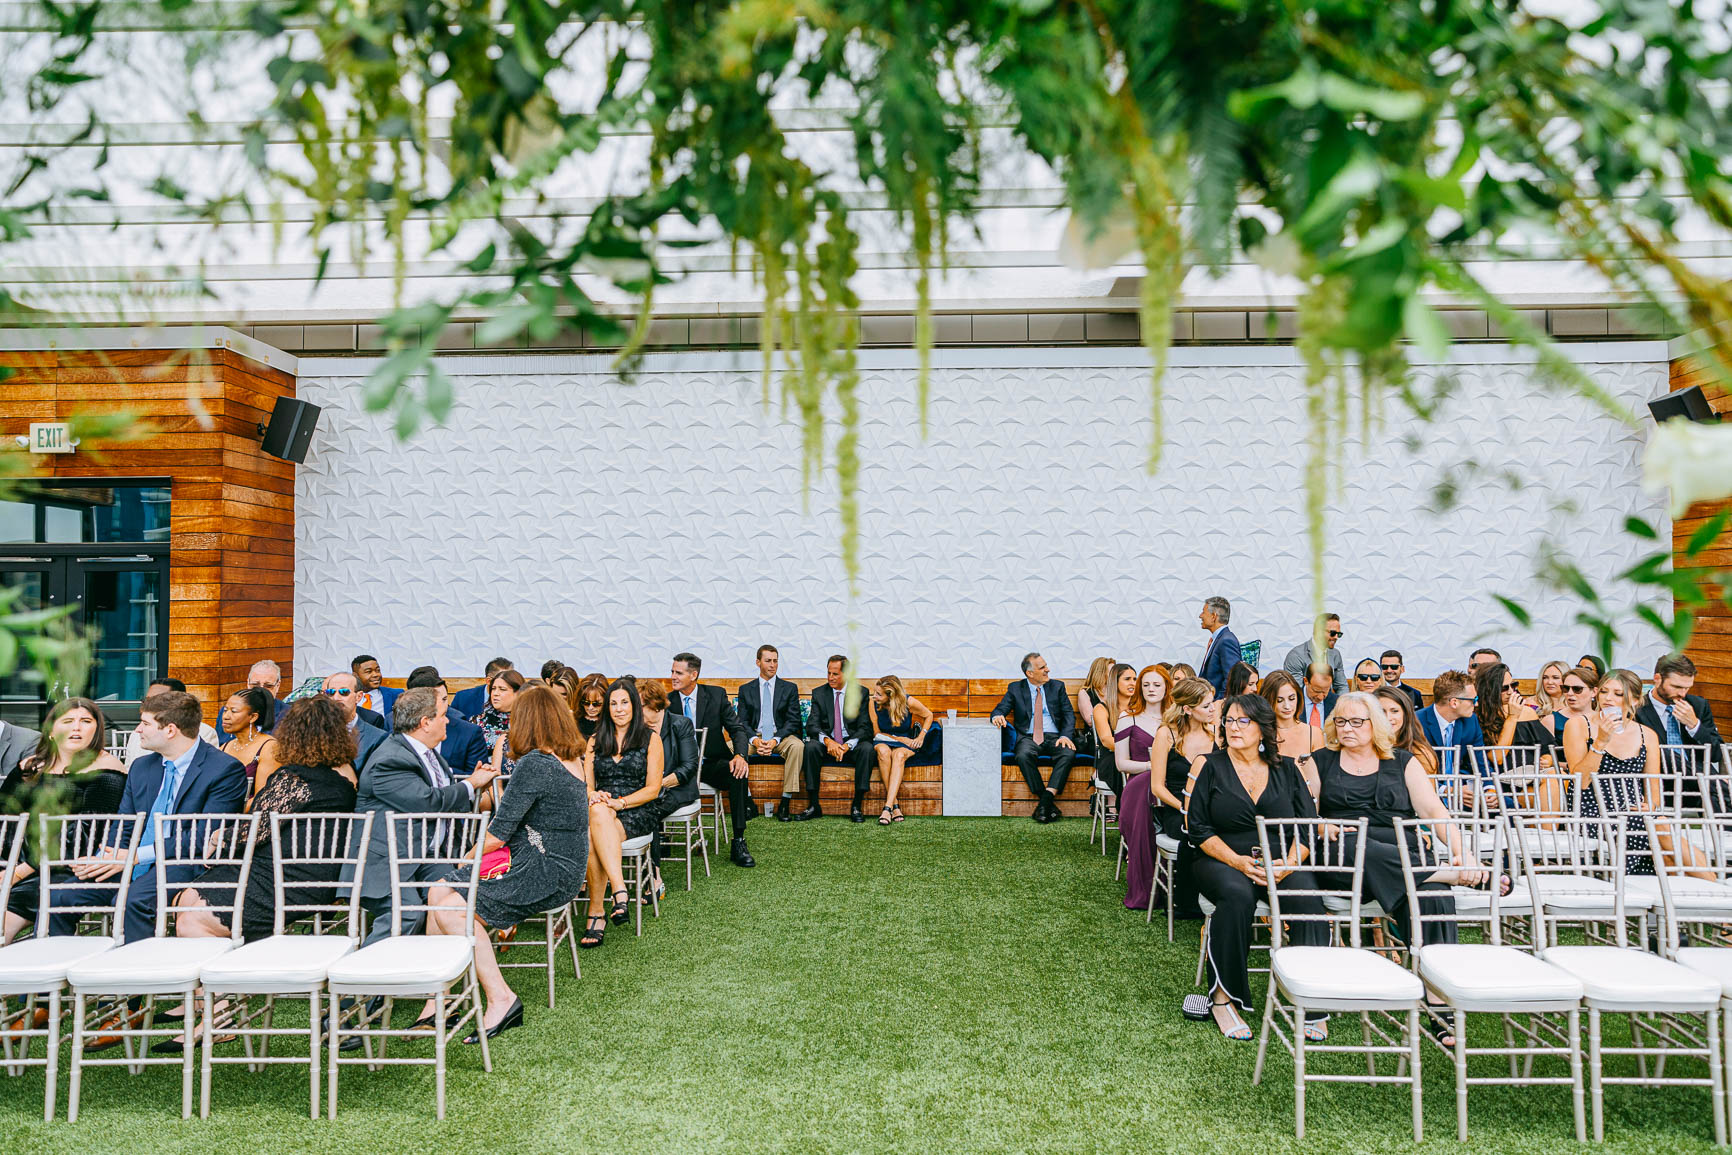 merchant & trade wedding ceremony in uptown Charlotte by Nhieu Tang Photography | nhieutang.com